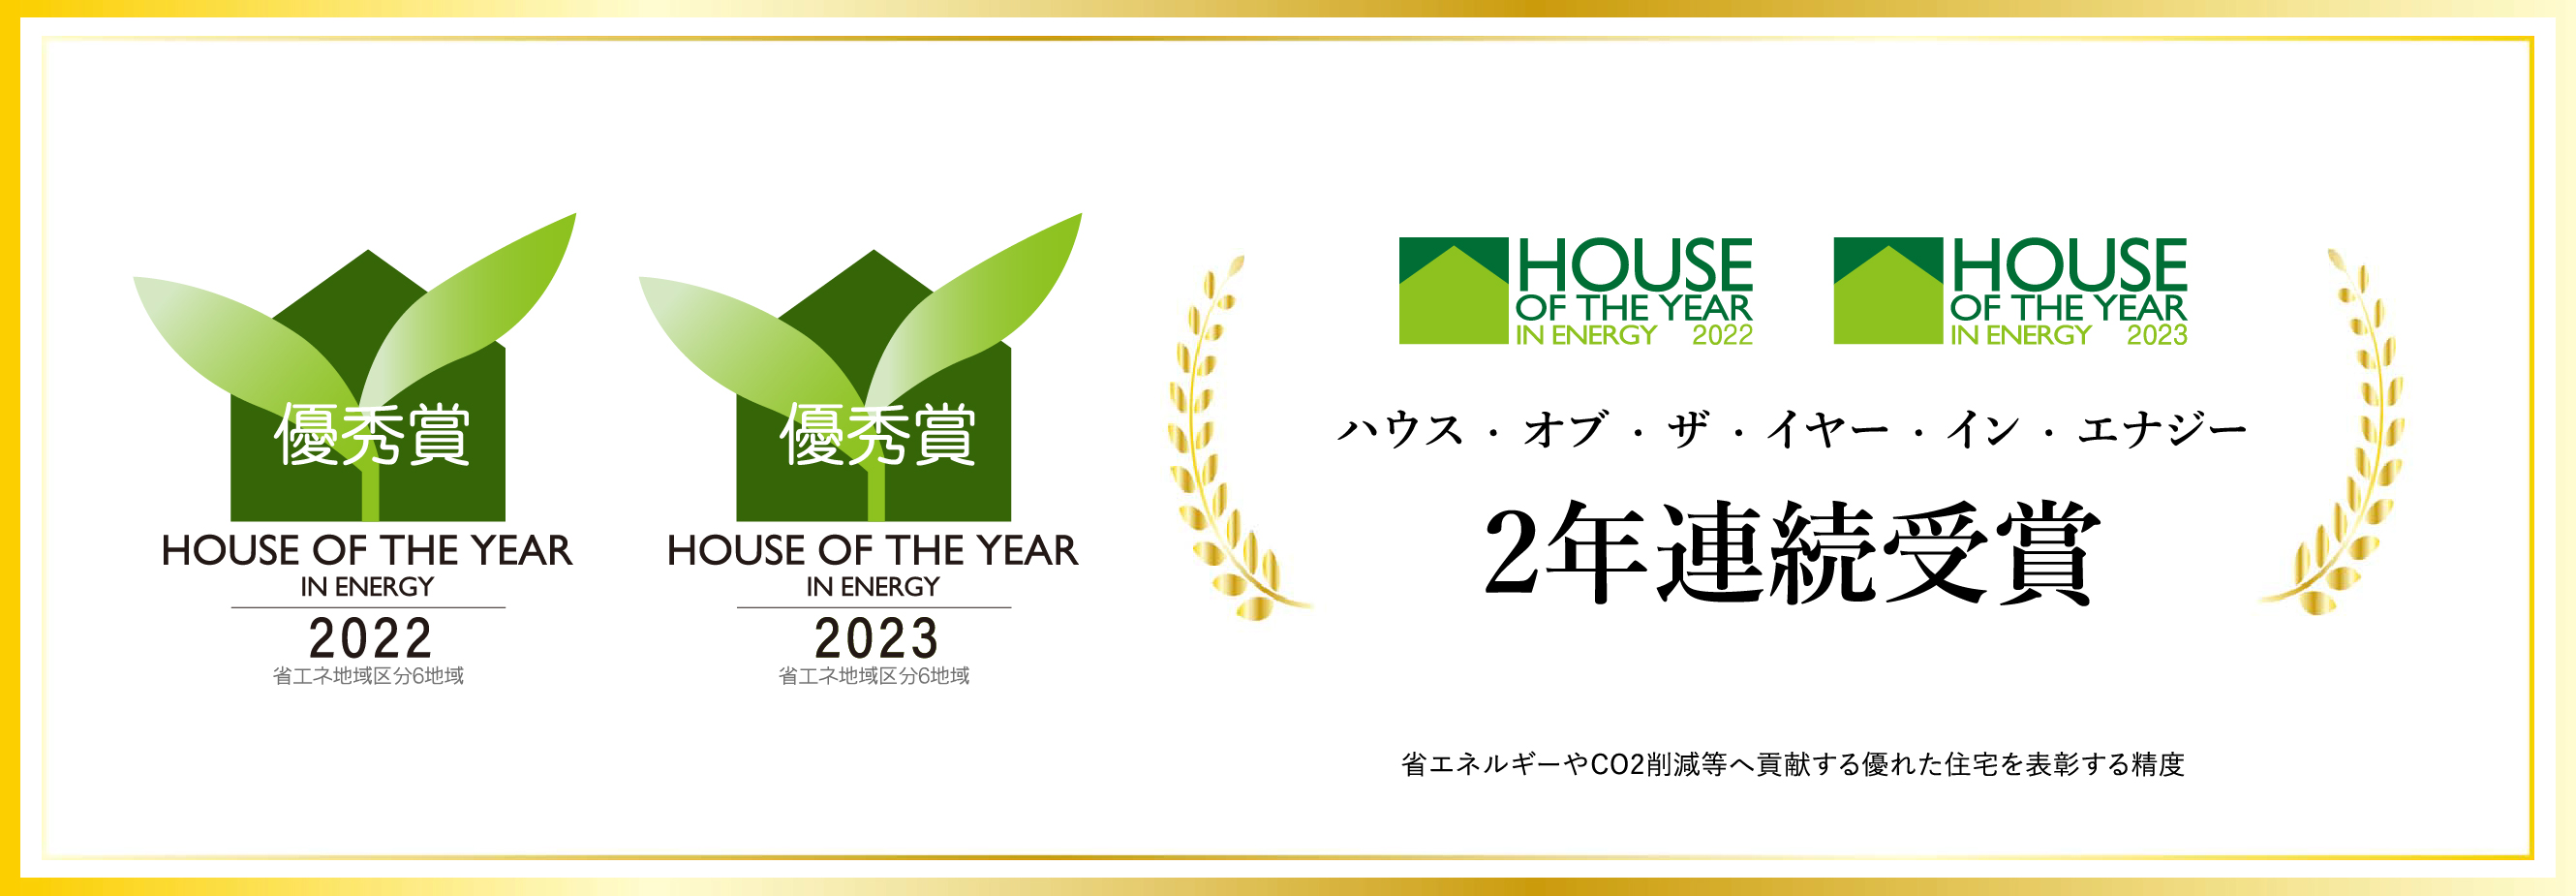 HOUSE OF THE YEAR2022・2023・2年連続受賞「省エネ地域区分6地域」